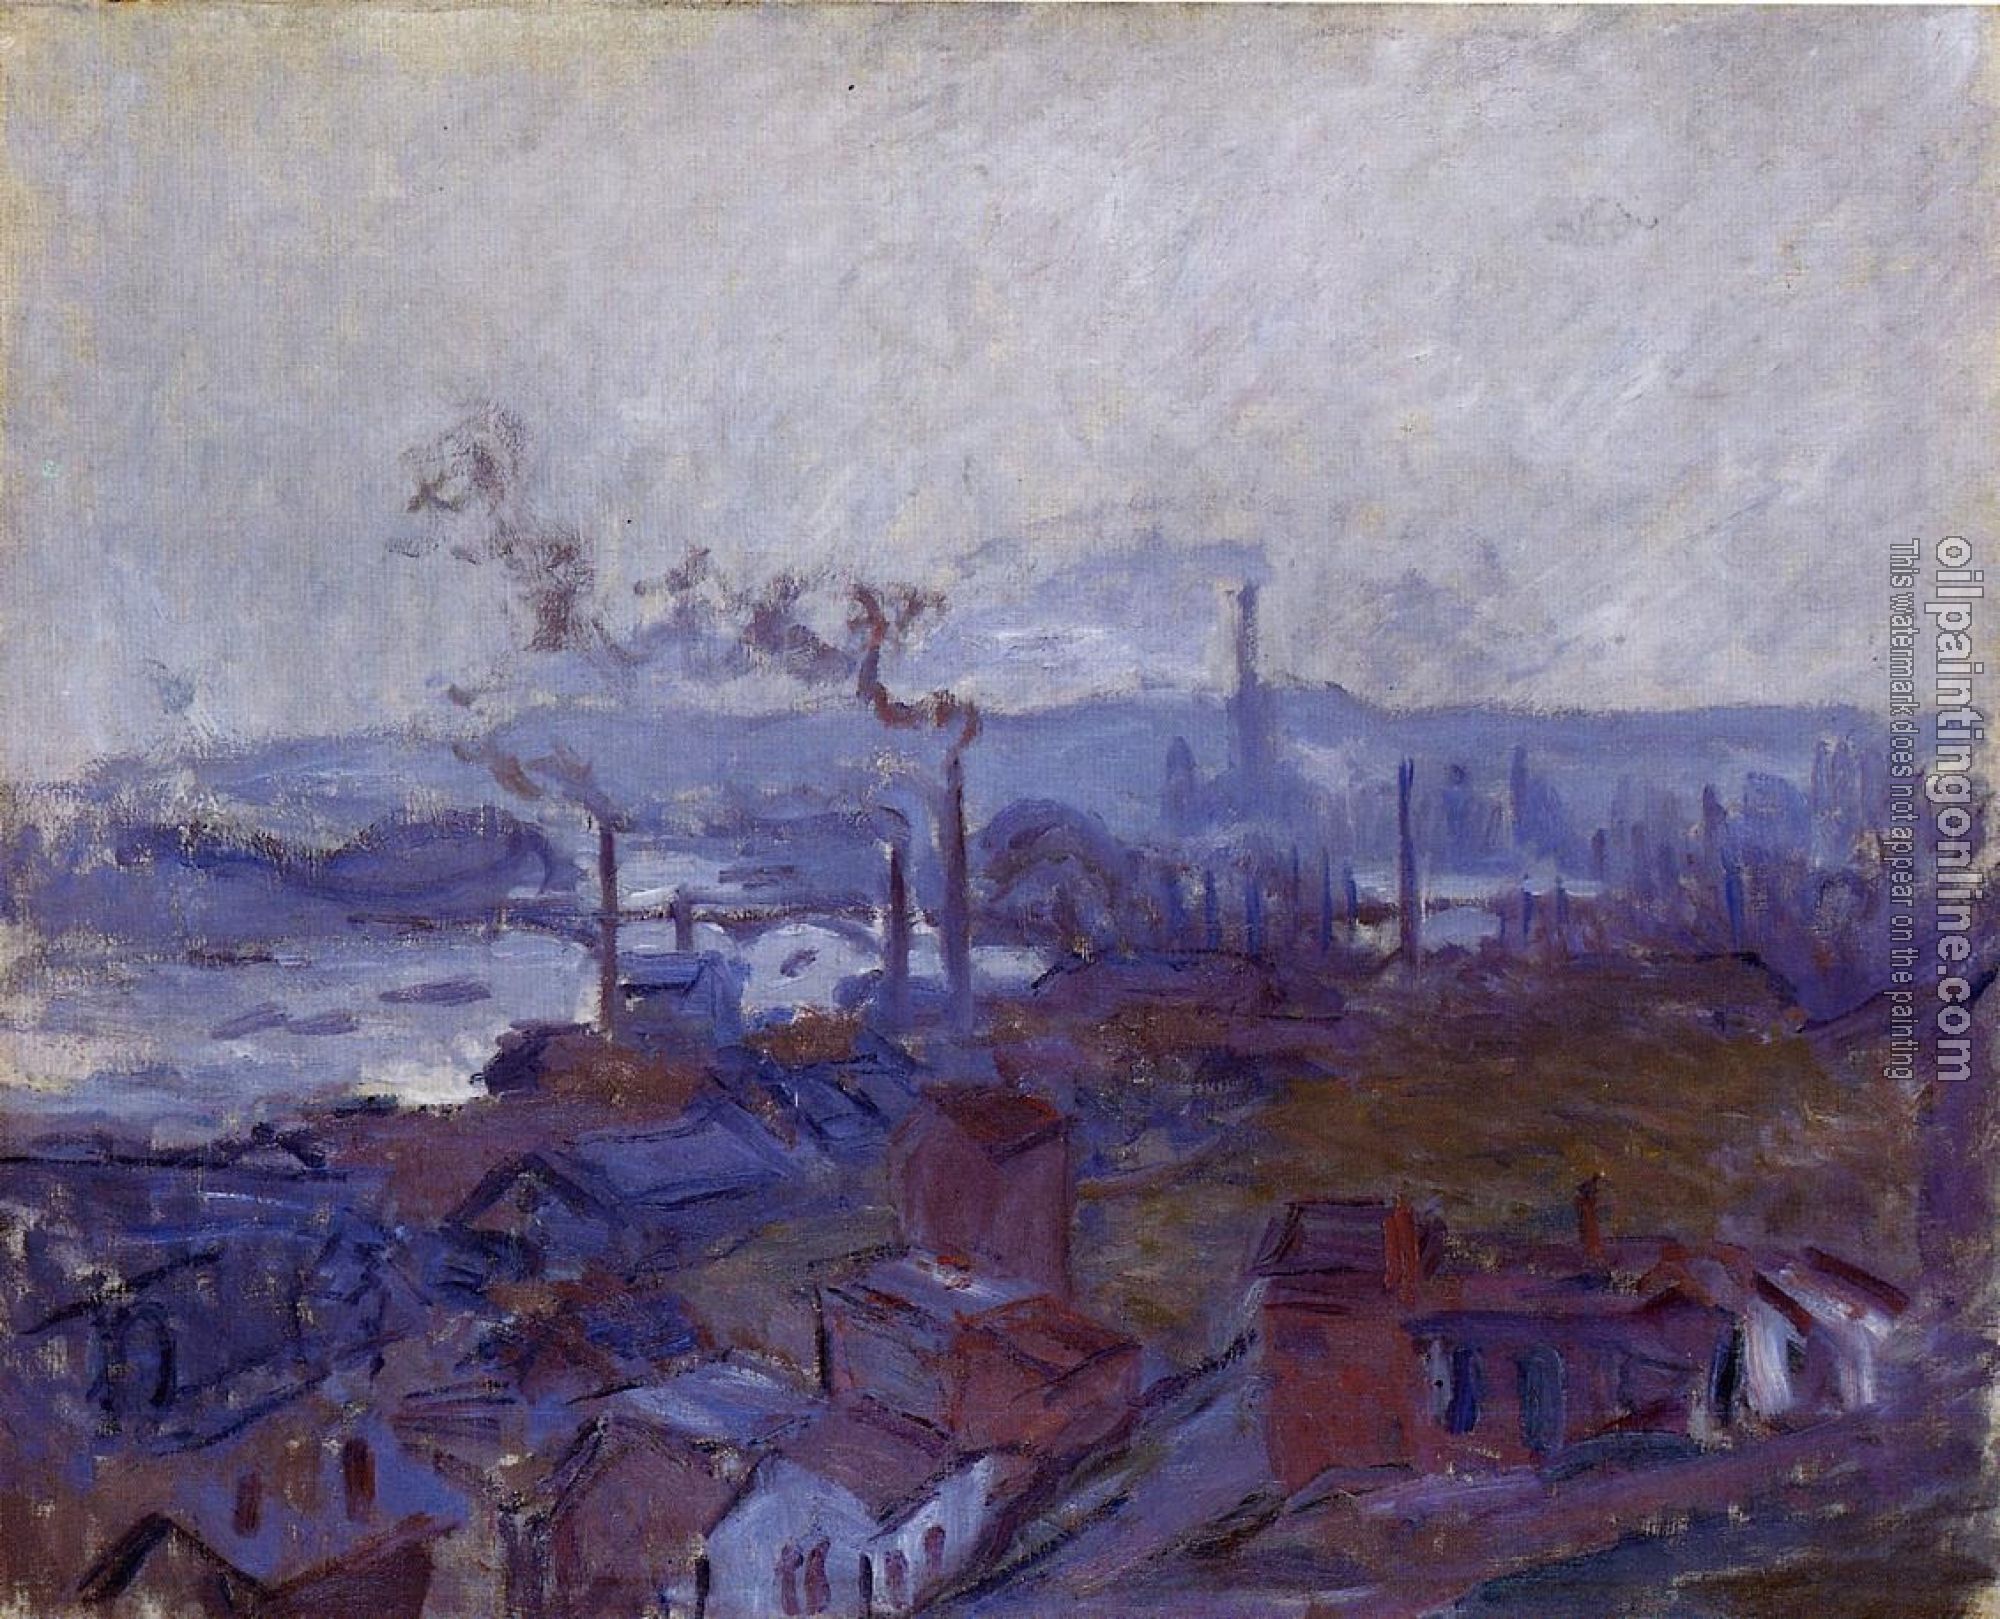 Monet, Claude Oscar - View of Rouen from the Cote Sainte-Catherine